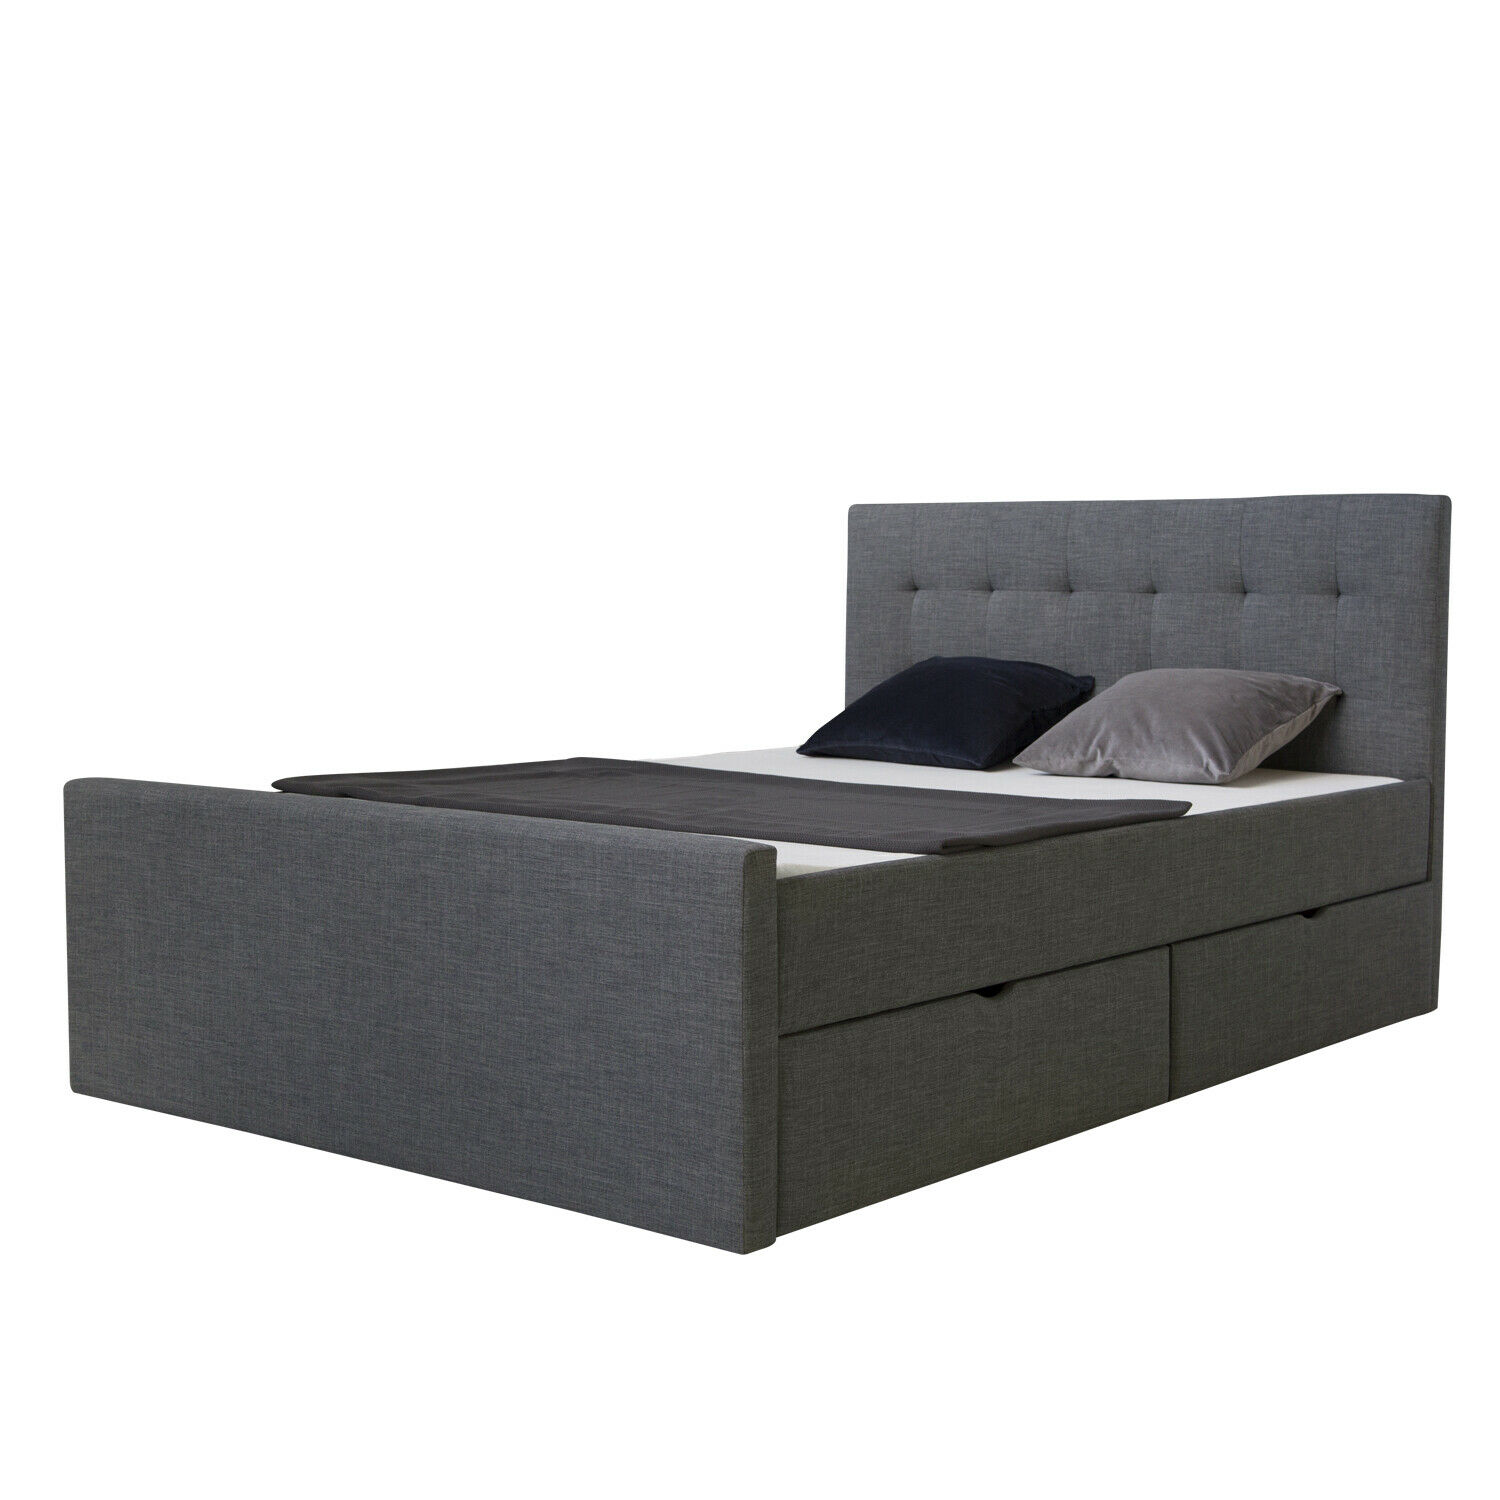 Upholstered Bed 180x200 Grey Double Bed Slatted Frame 2 Drawers